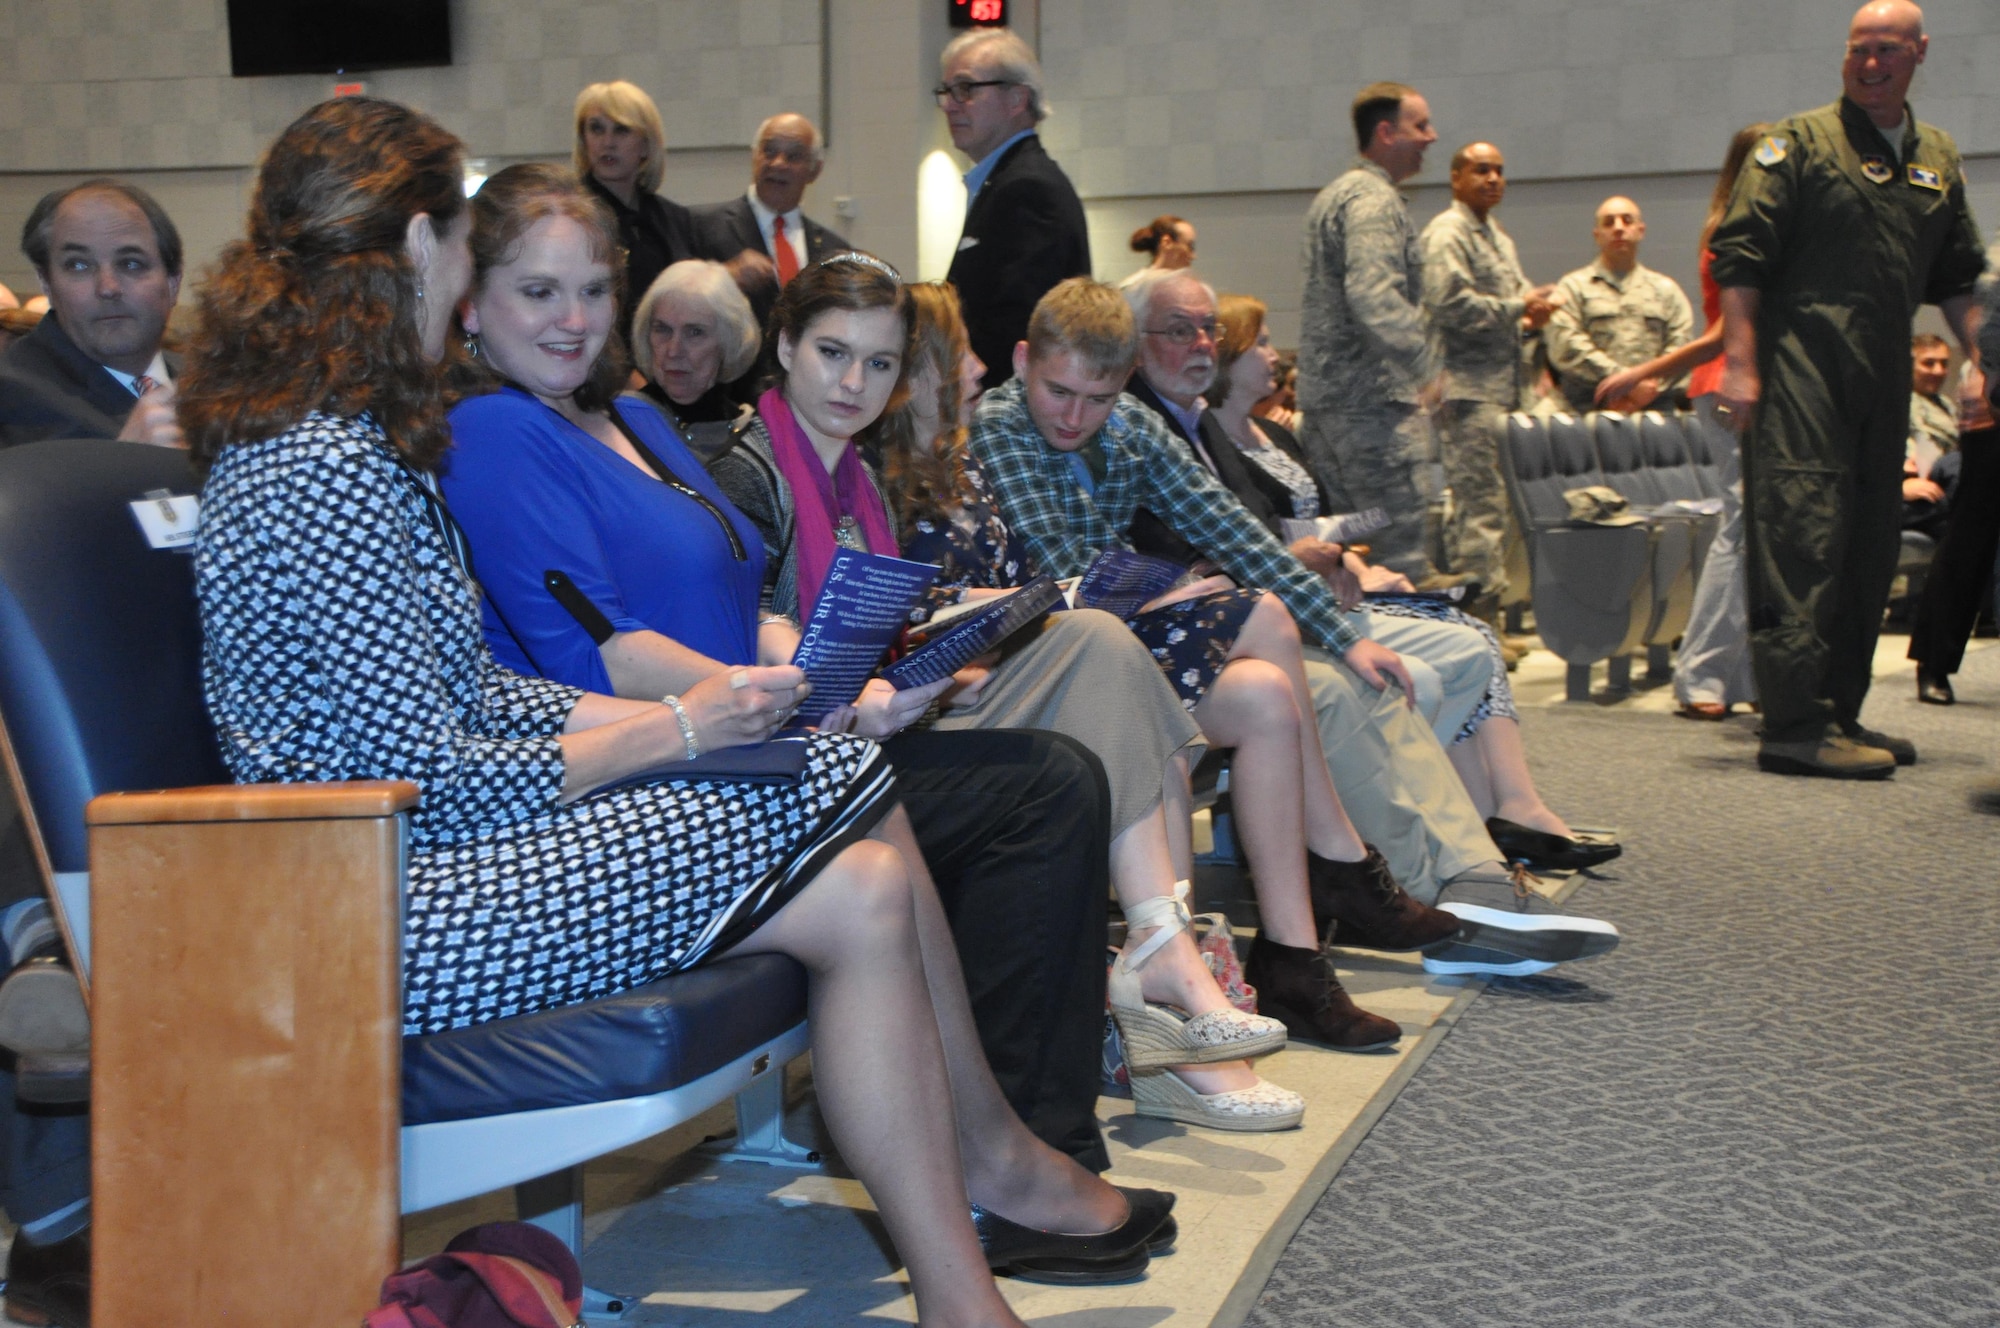 Sandy Stokes (left) wife of 22nd Air Force commander Maj. Gen. John Stokes, sits with the Ostrat family before Col. Kenneth Ostrat’s Assumption of Command ceremony March 5 at Maxwell Air Force Base. Ostrat returns to the 908th Airlift Wing after his previous stint as the director of operations of the wing’s 357th Airlift Squadron from July 2008 until December 2012. (U.S. Air Force photo by Bradley J. Clark)